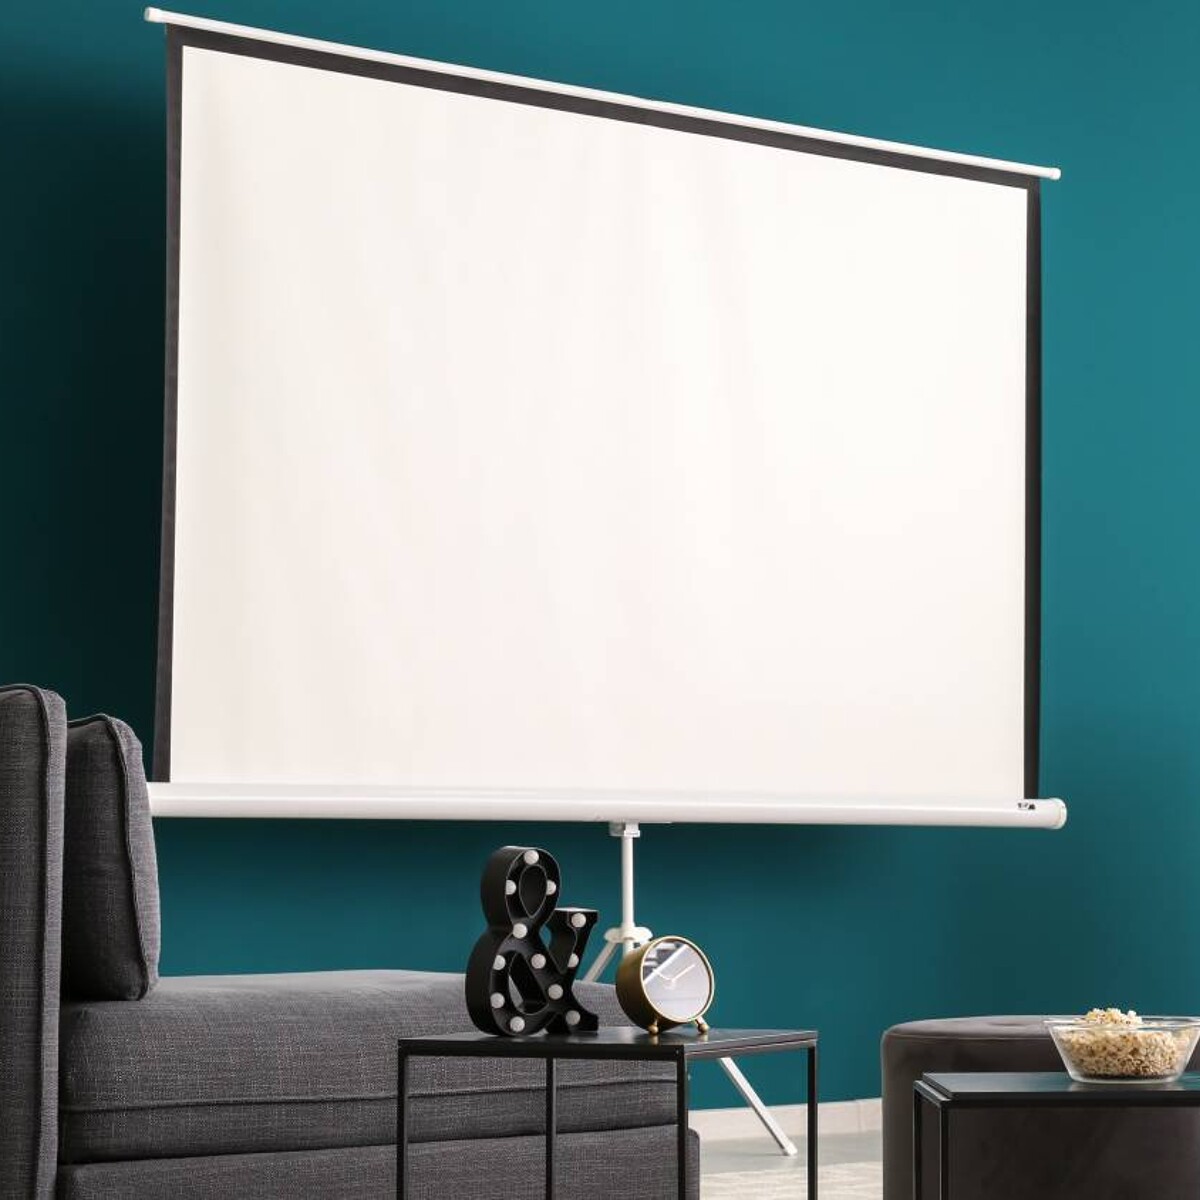 How to Apply Movie Projector Screen Paint